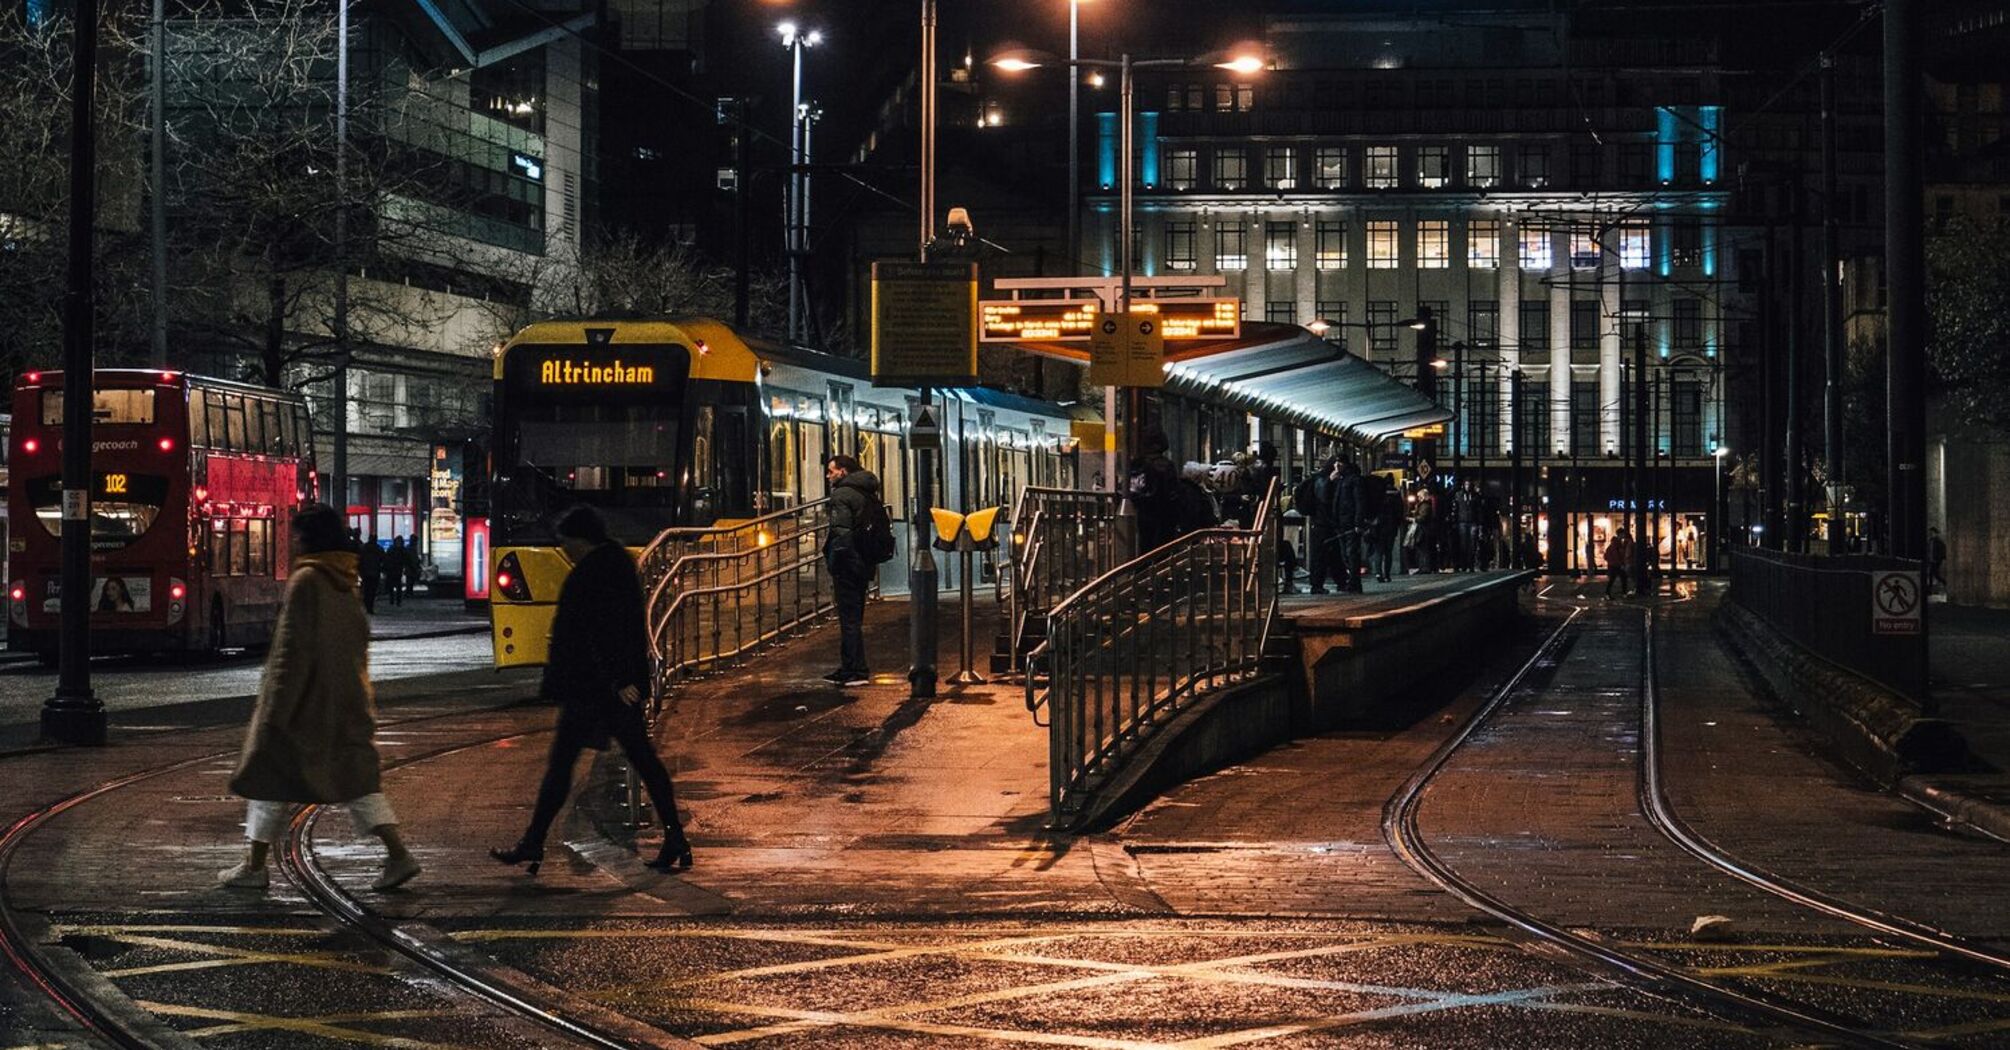 Night scene at a busy tram stop in Manchester with people crossing the street and a bus on the left